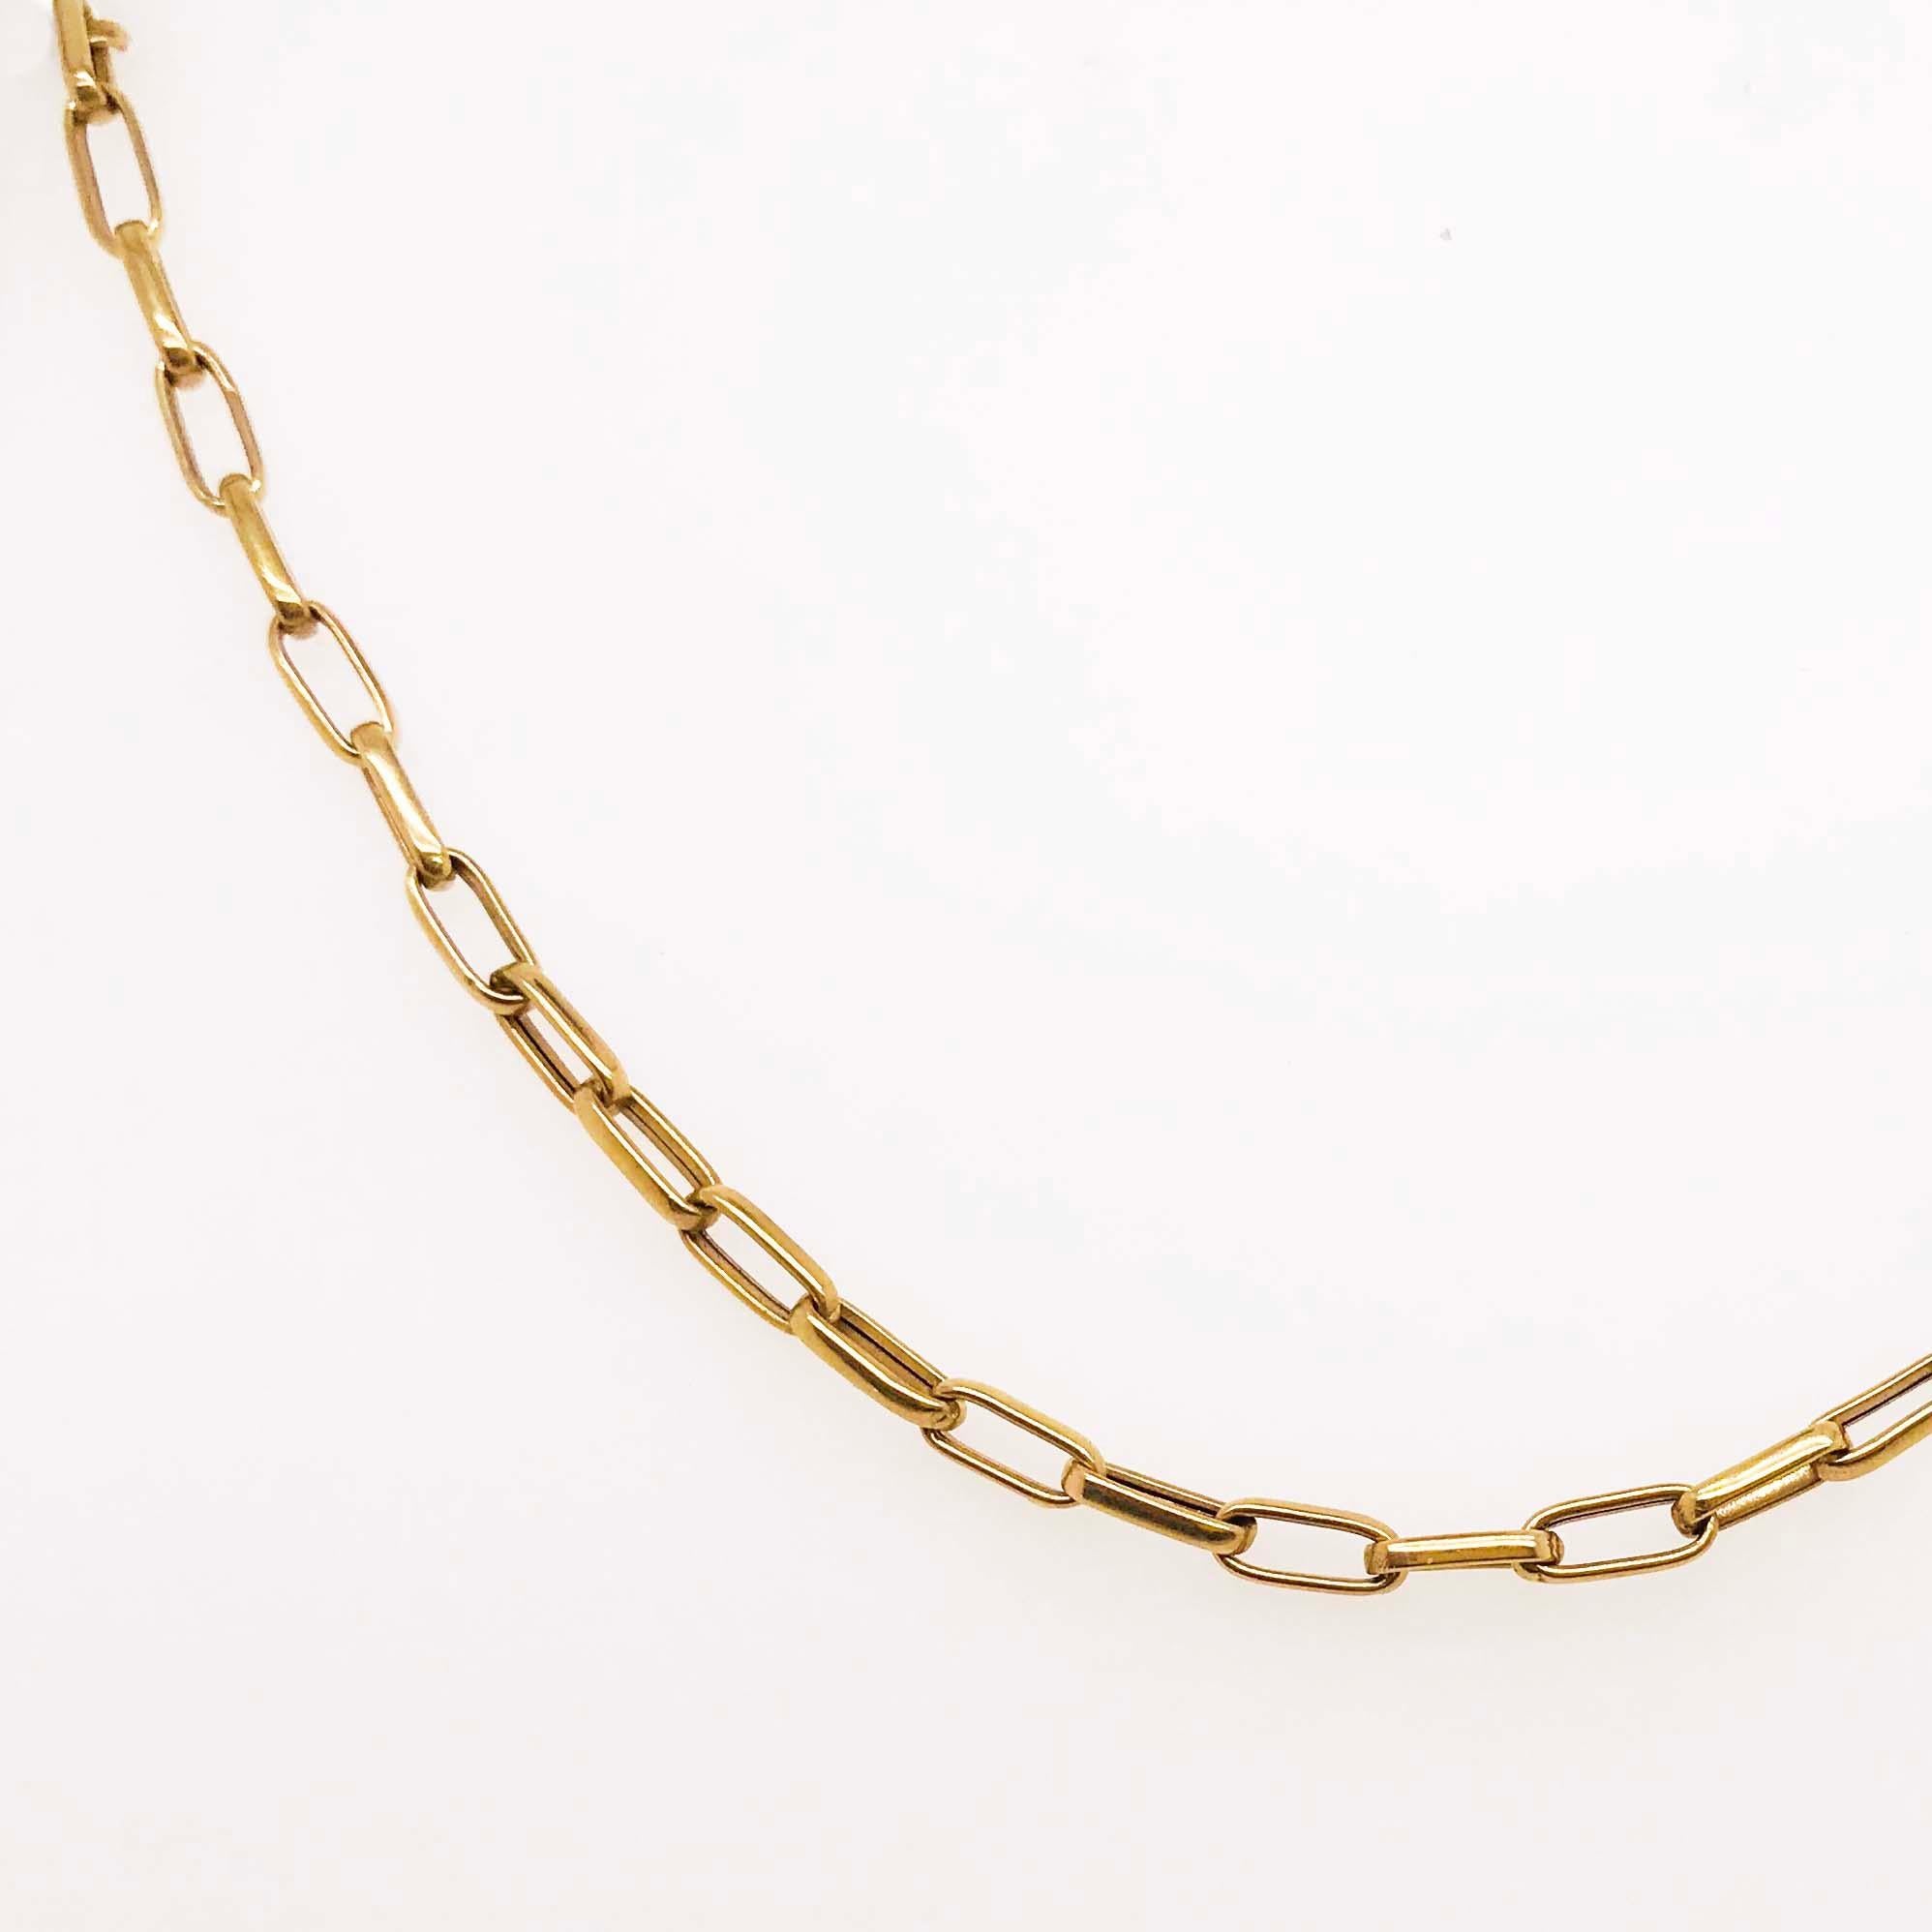 Modern Paperclip Chain Necklace 14 Karat Yellow Gold Paperclip Link Chain